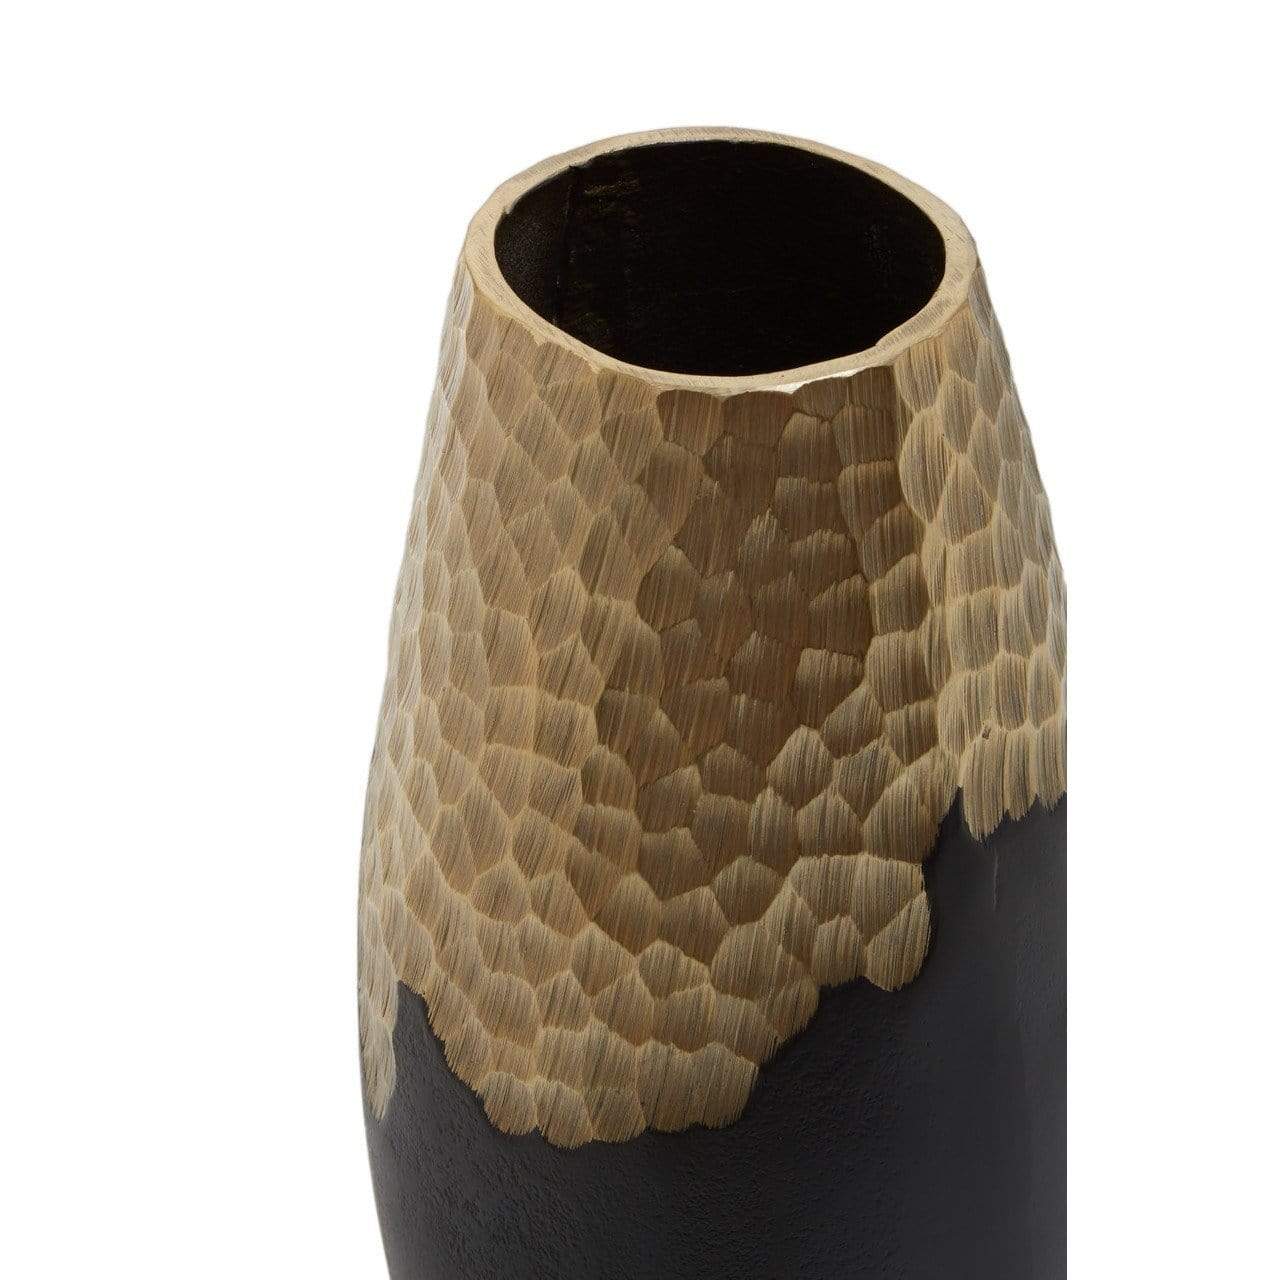 Noosa & Co. Accessories Deus Black Gold Small Vase | OUTLET House of Isabella UK